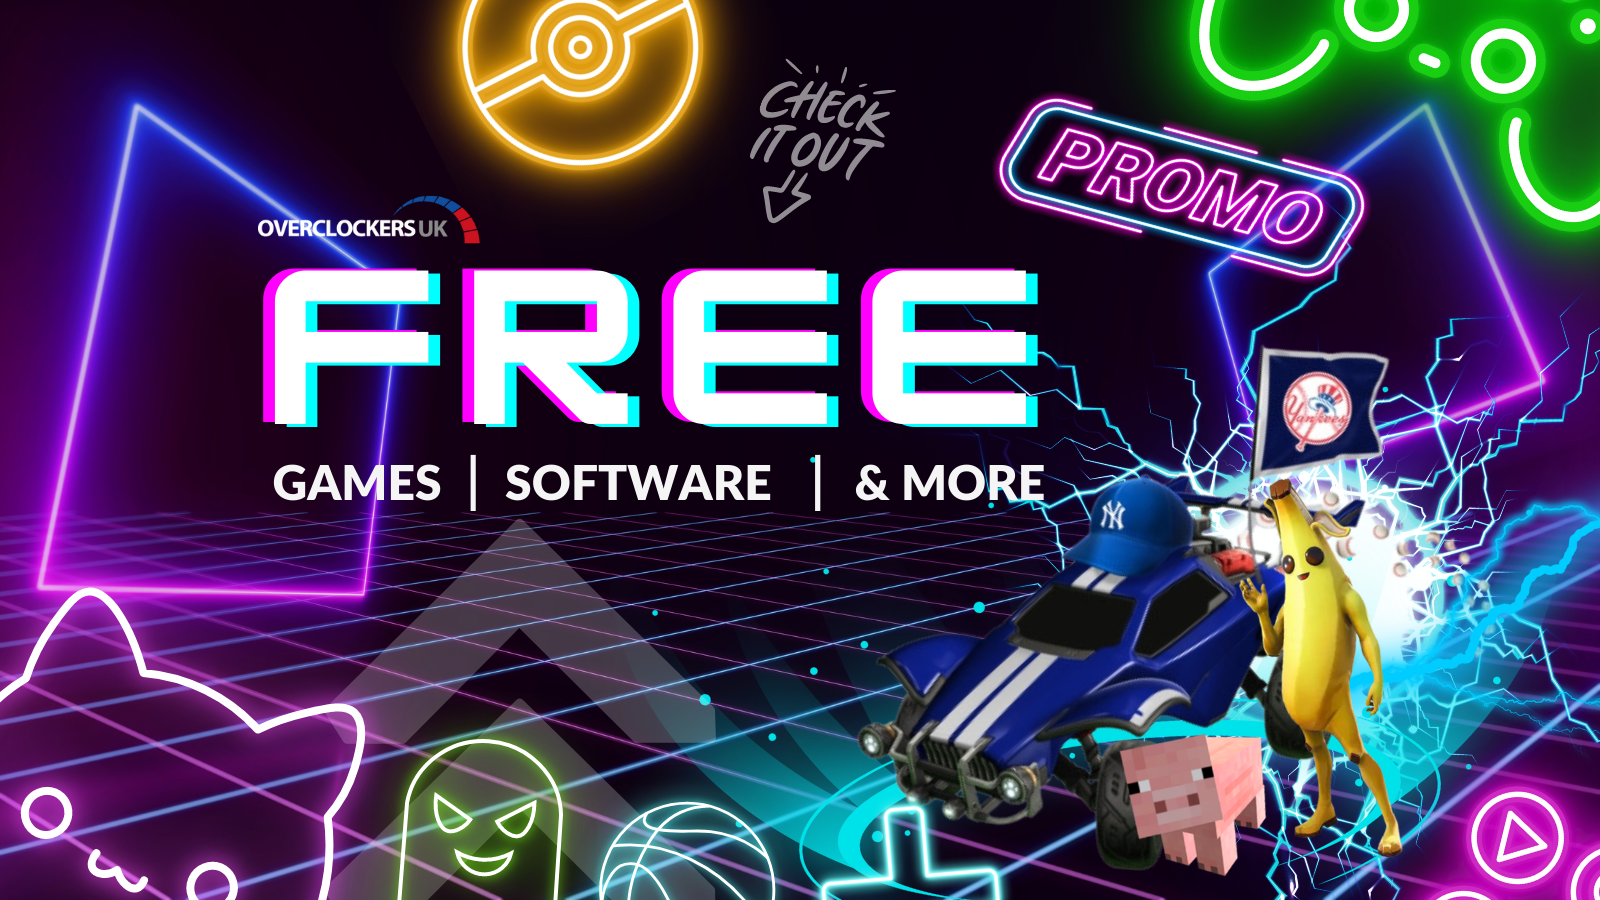 Free Games, Software, and More